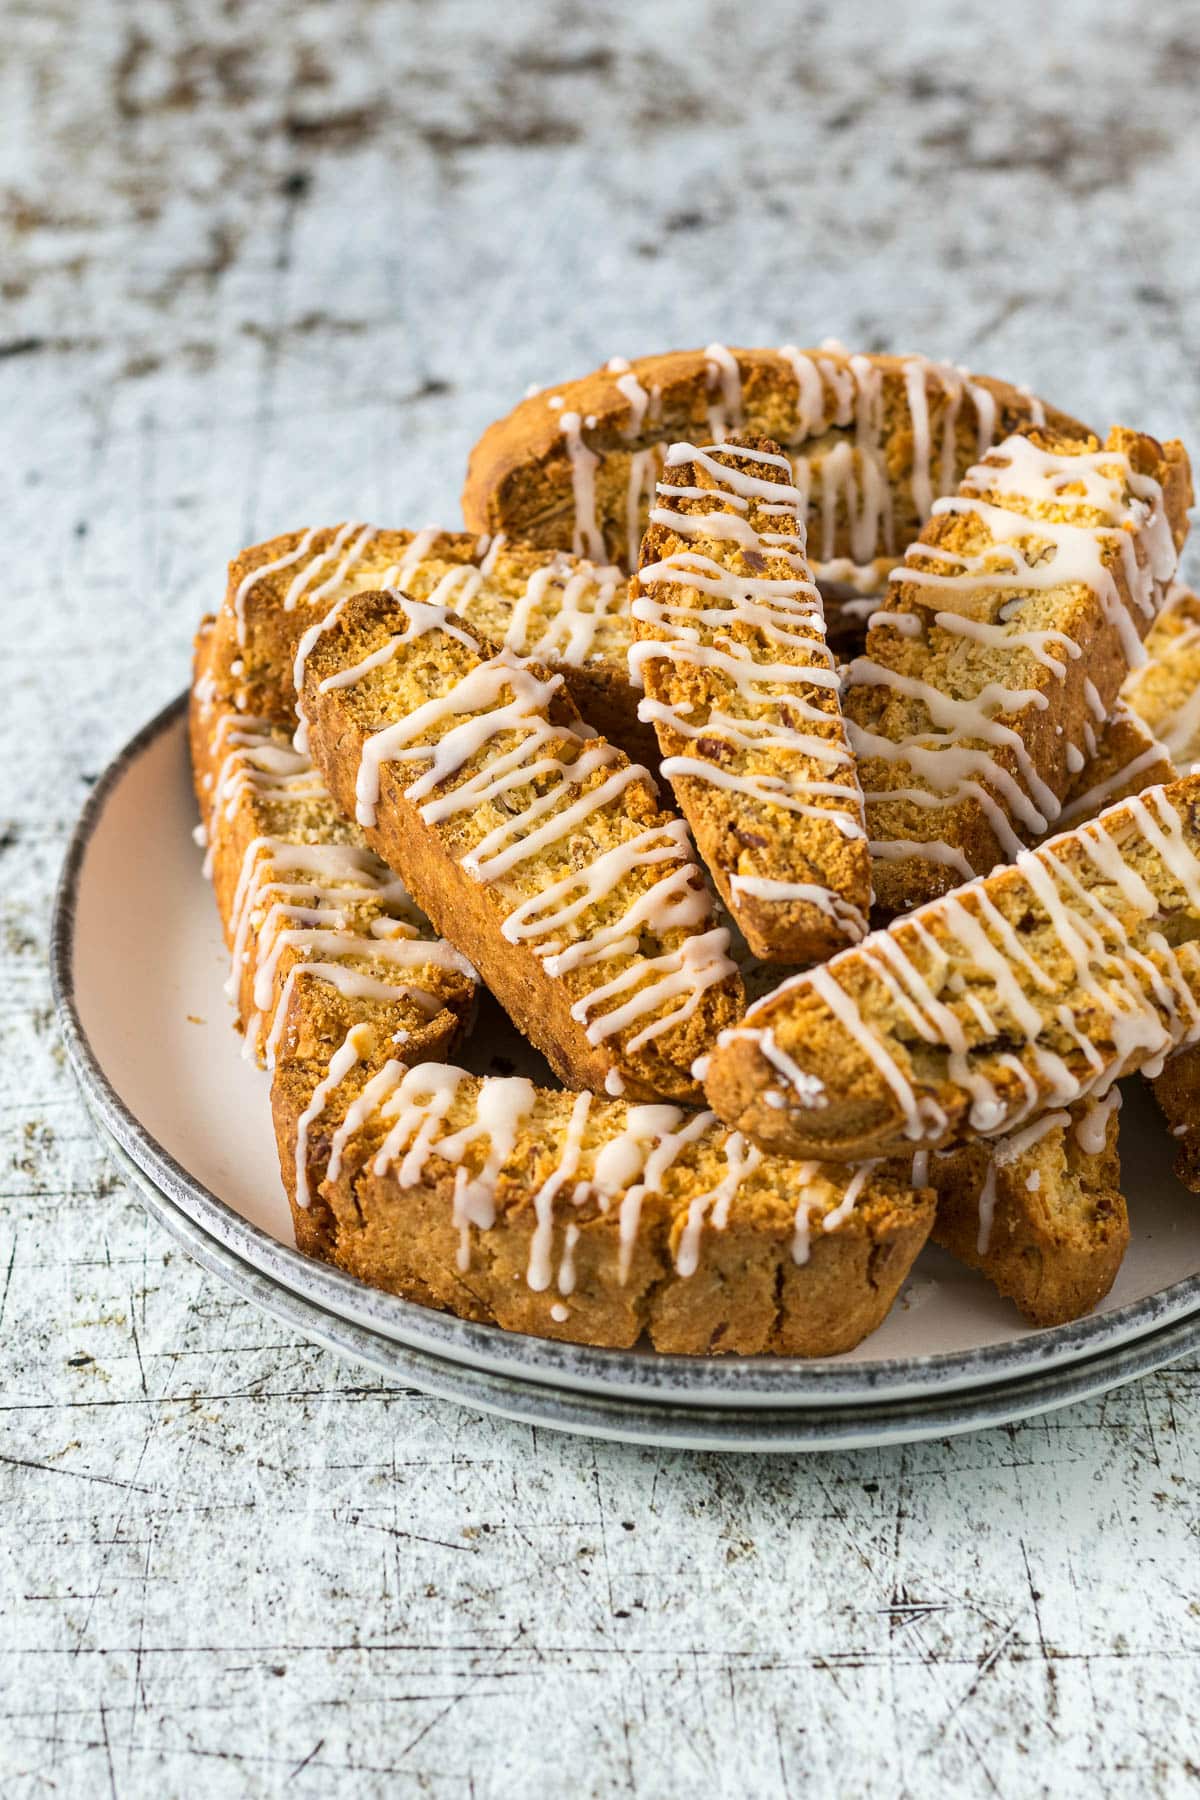 Biscotti piled on a plate.